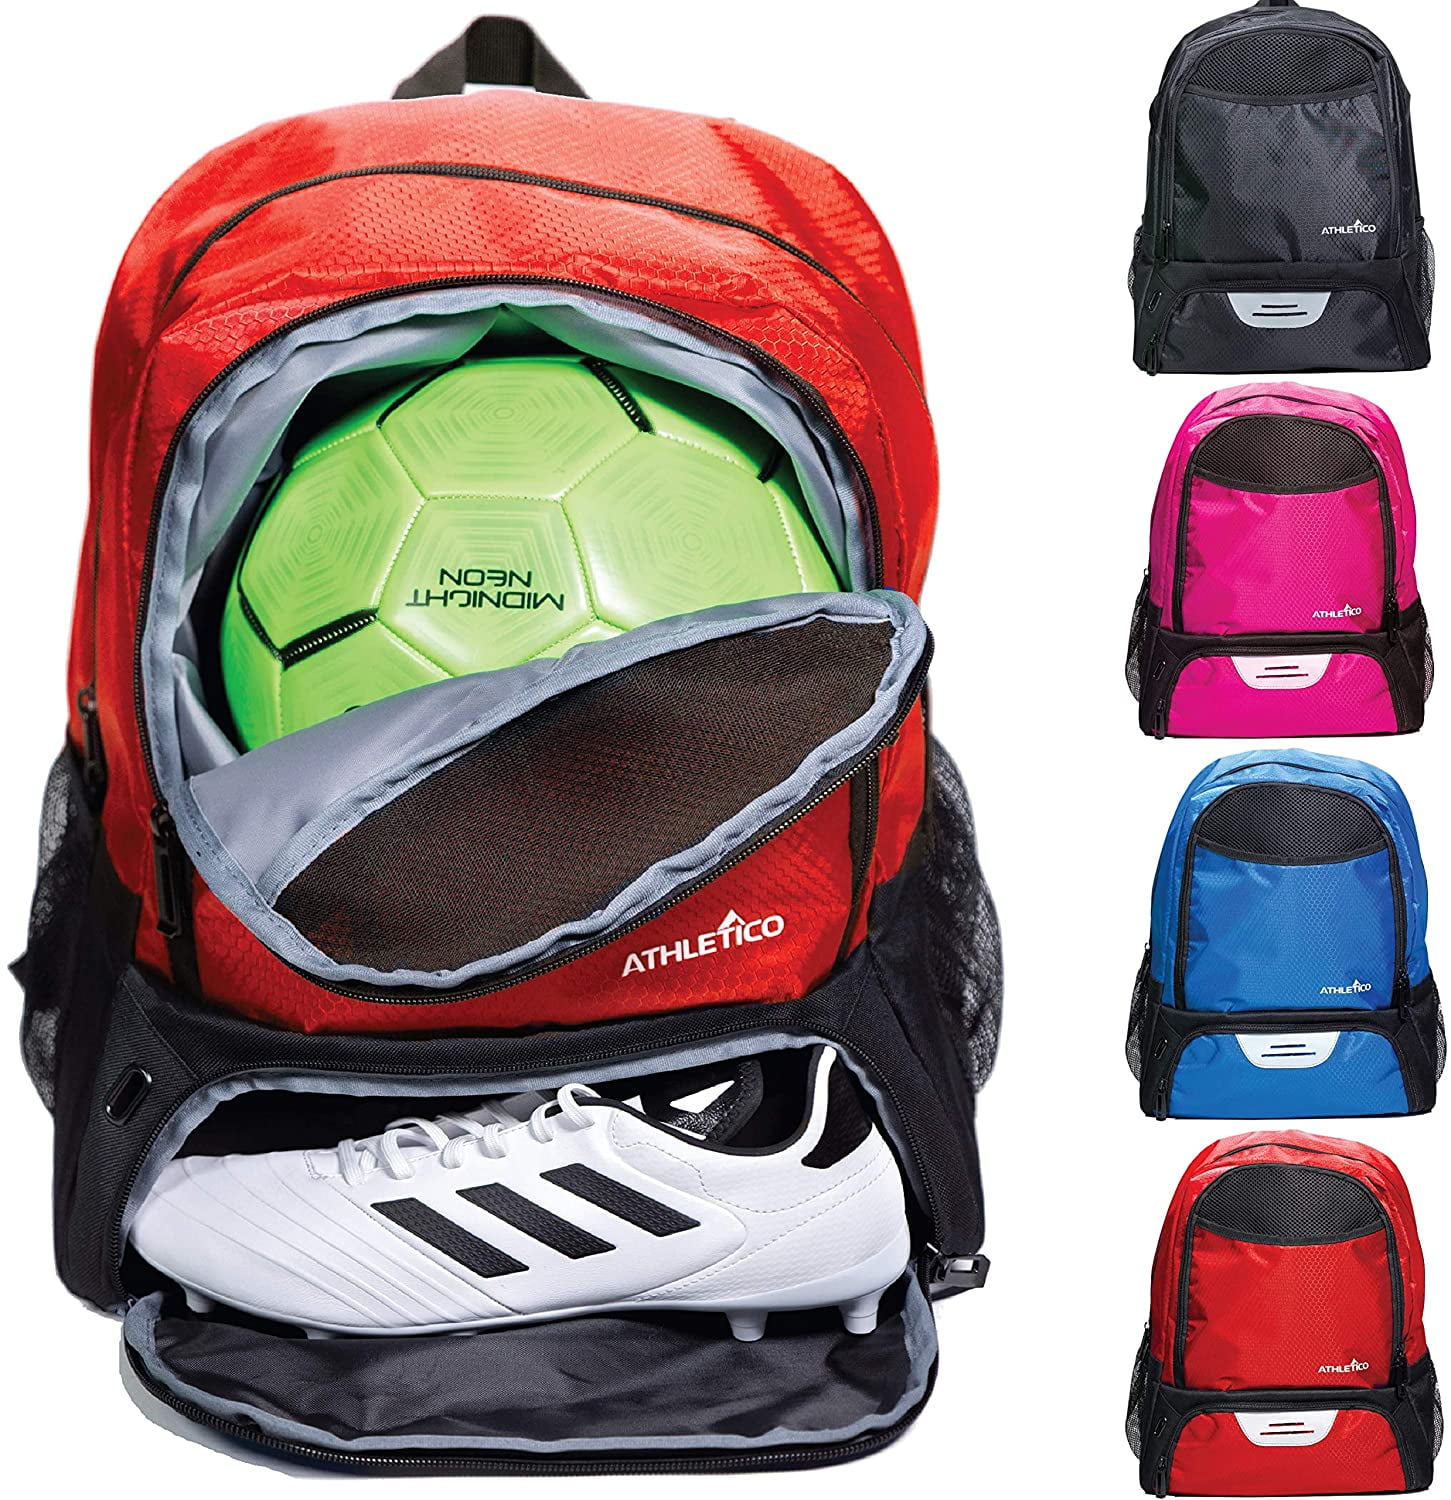 Football Backpack Carry Bag For Basketballs Fashion Waterproof